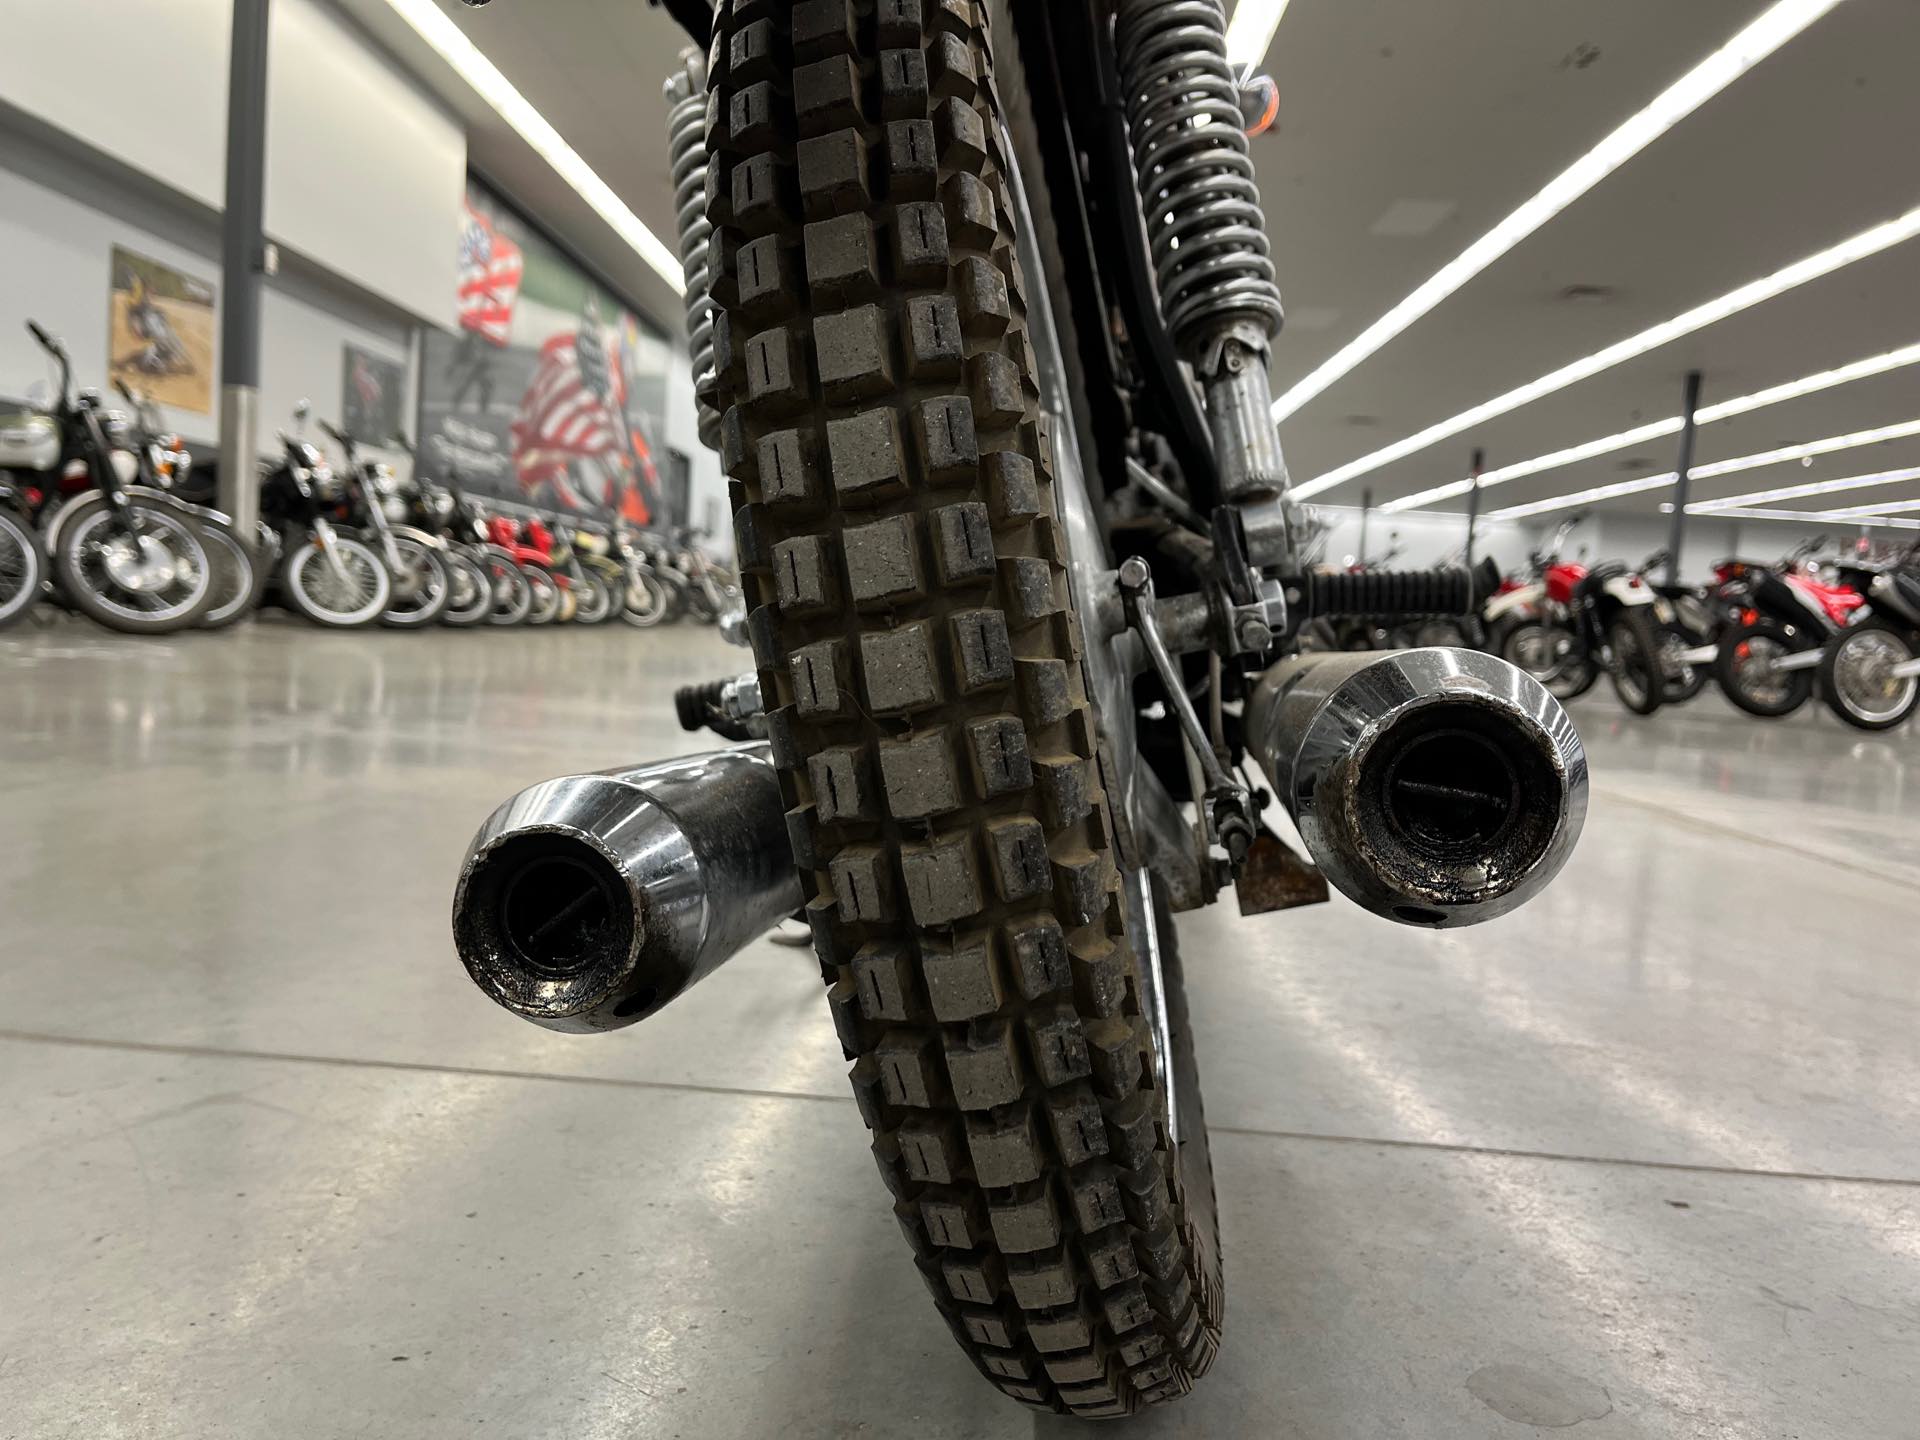 1972 YAMAHA DS7 250 at Aces Motorcycles - Denver